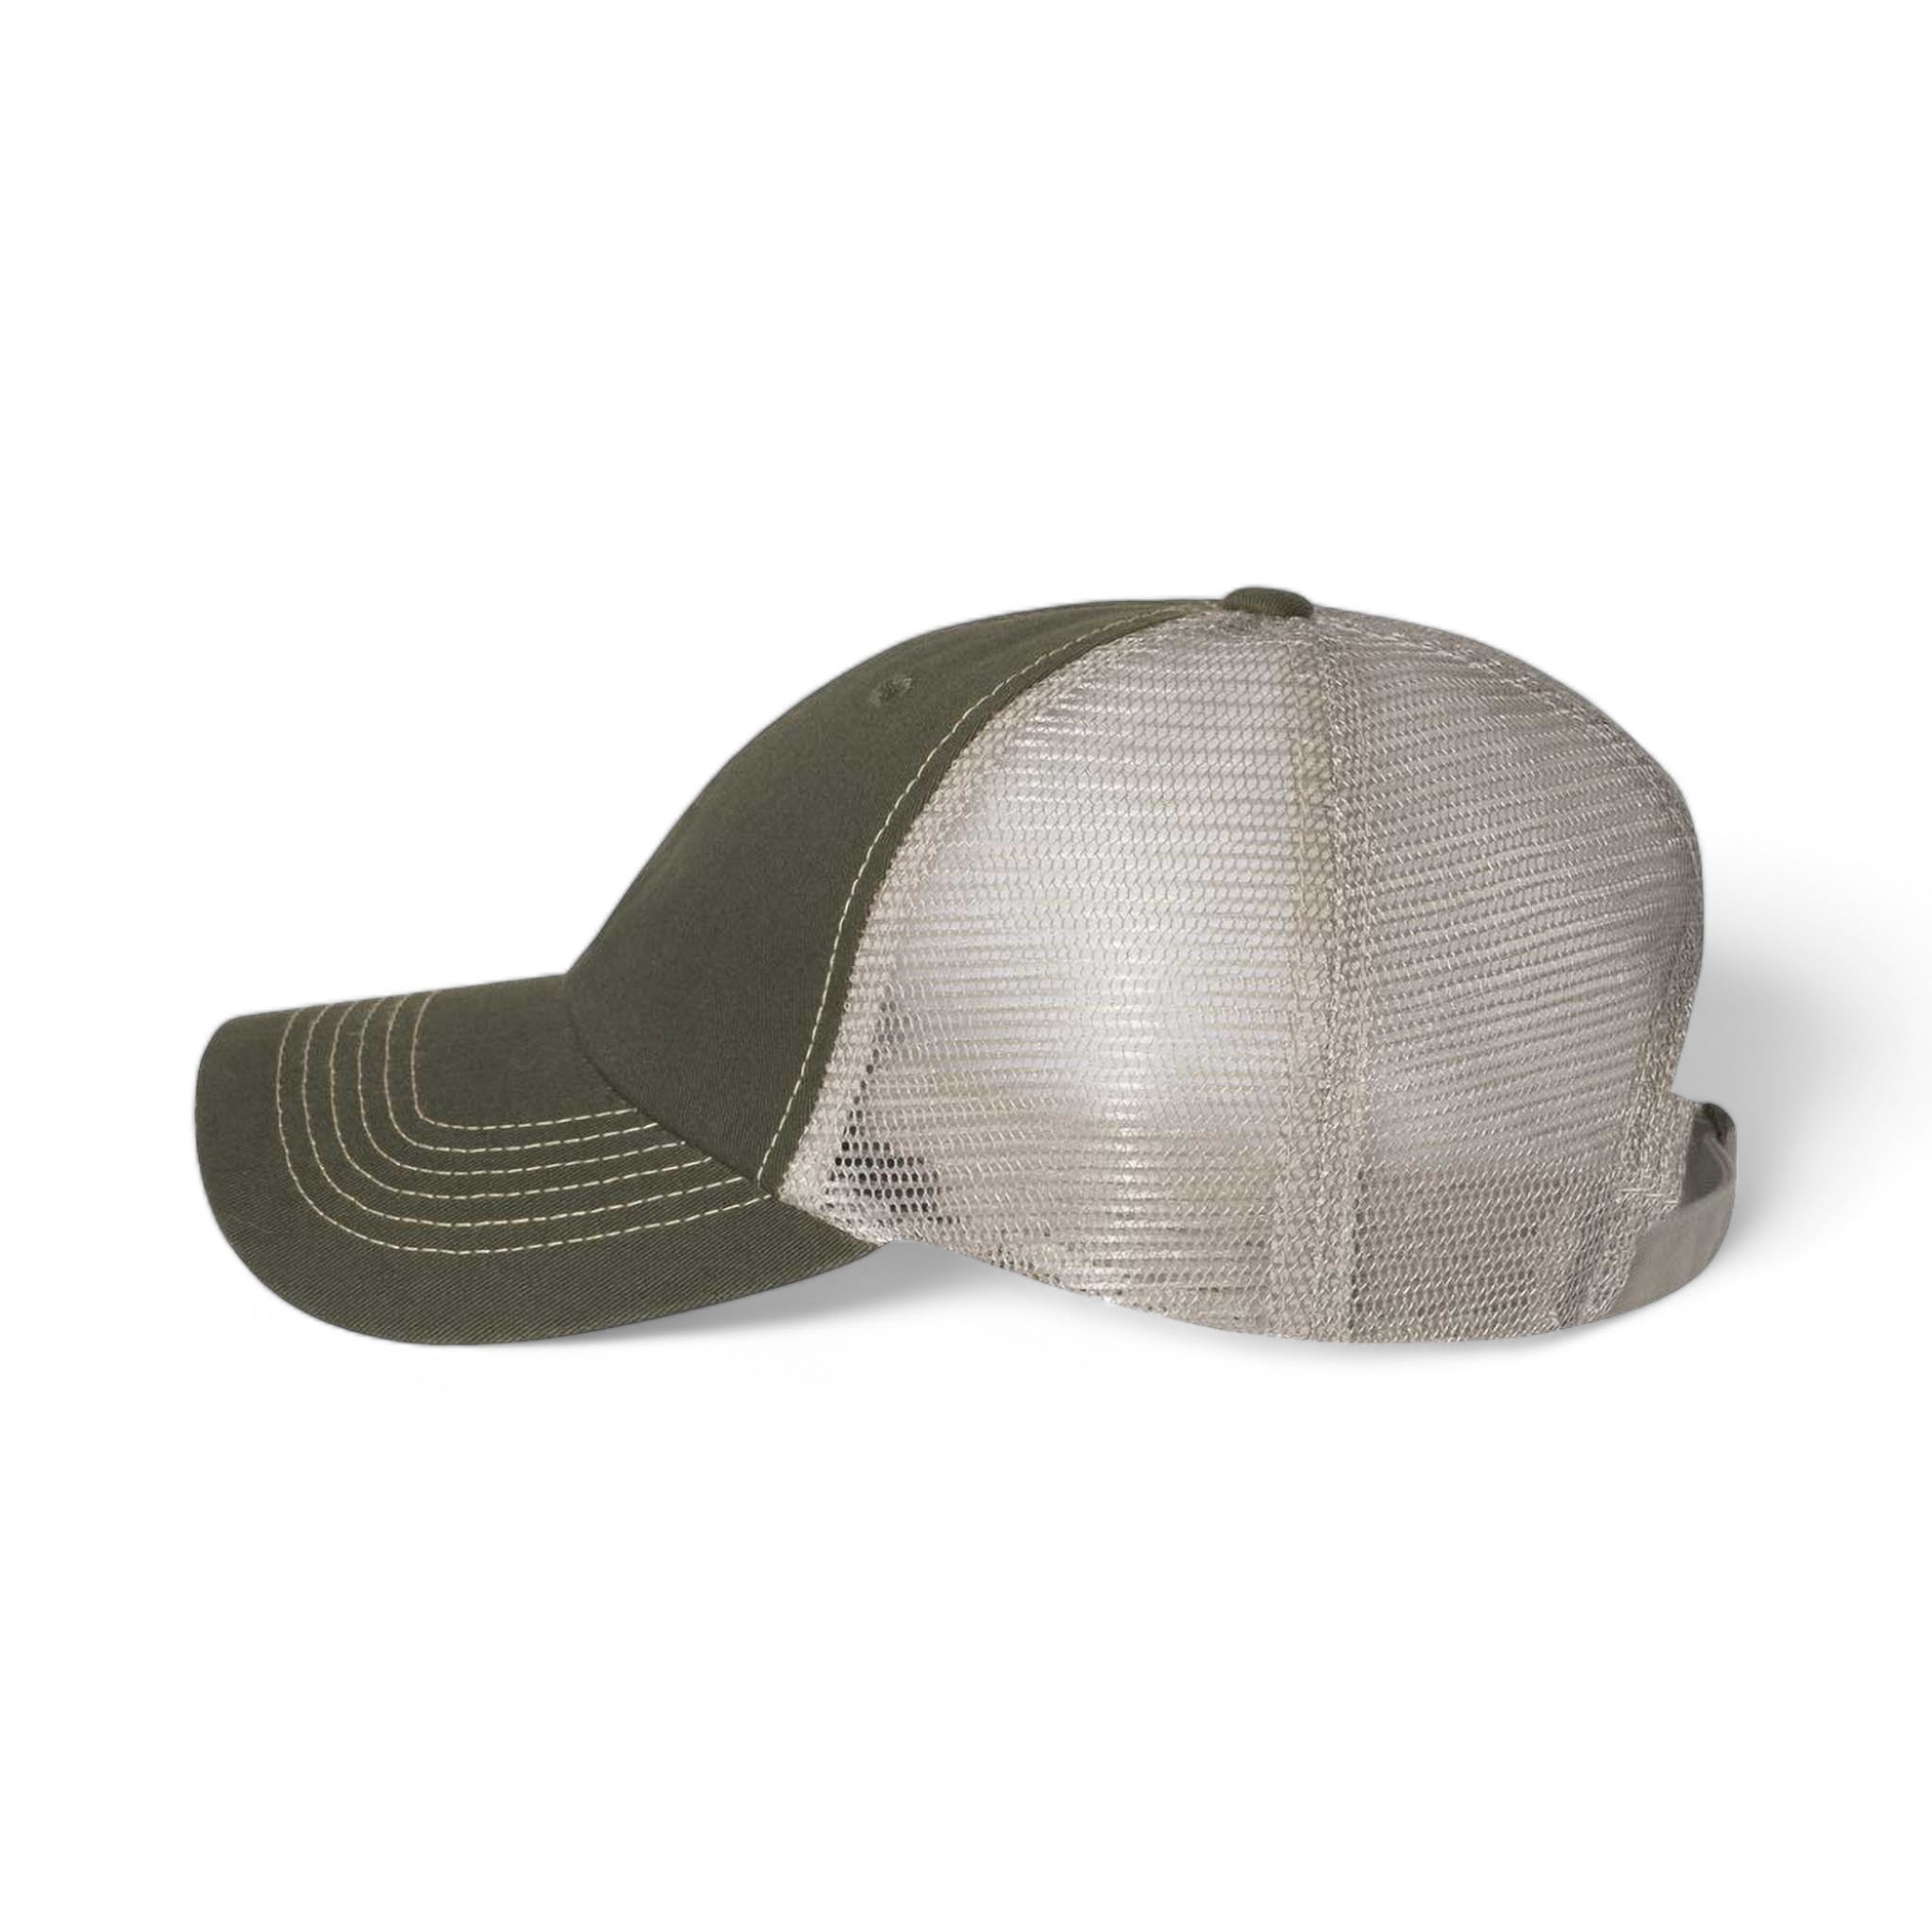 Side view of Sportsman 3100 custom hat in olive and khaki